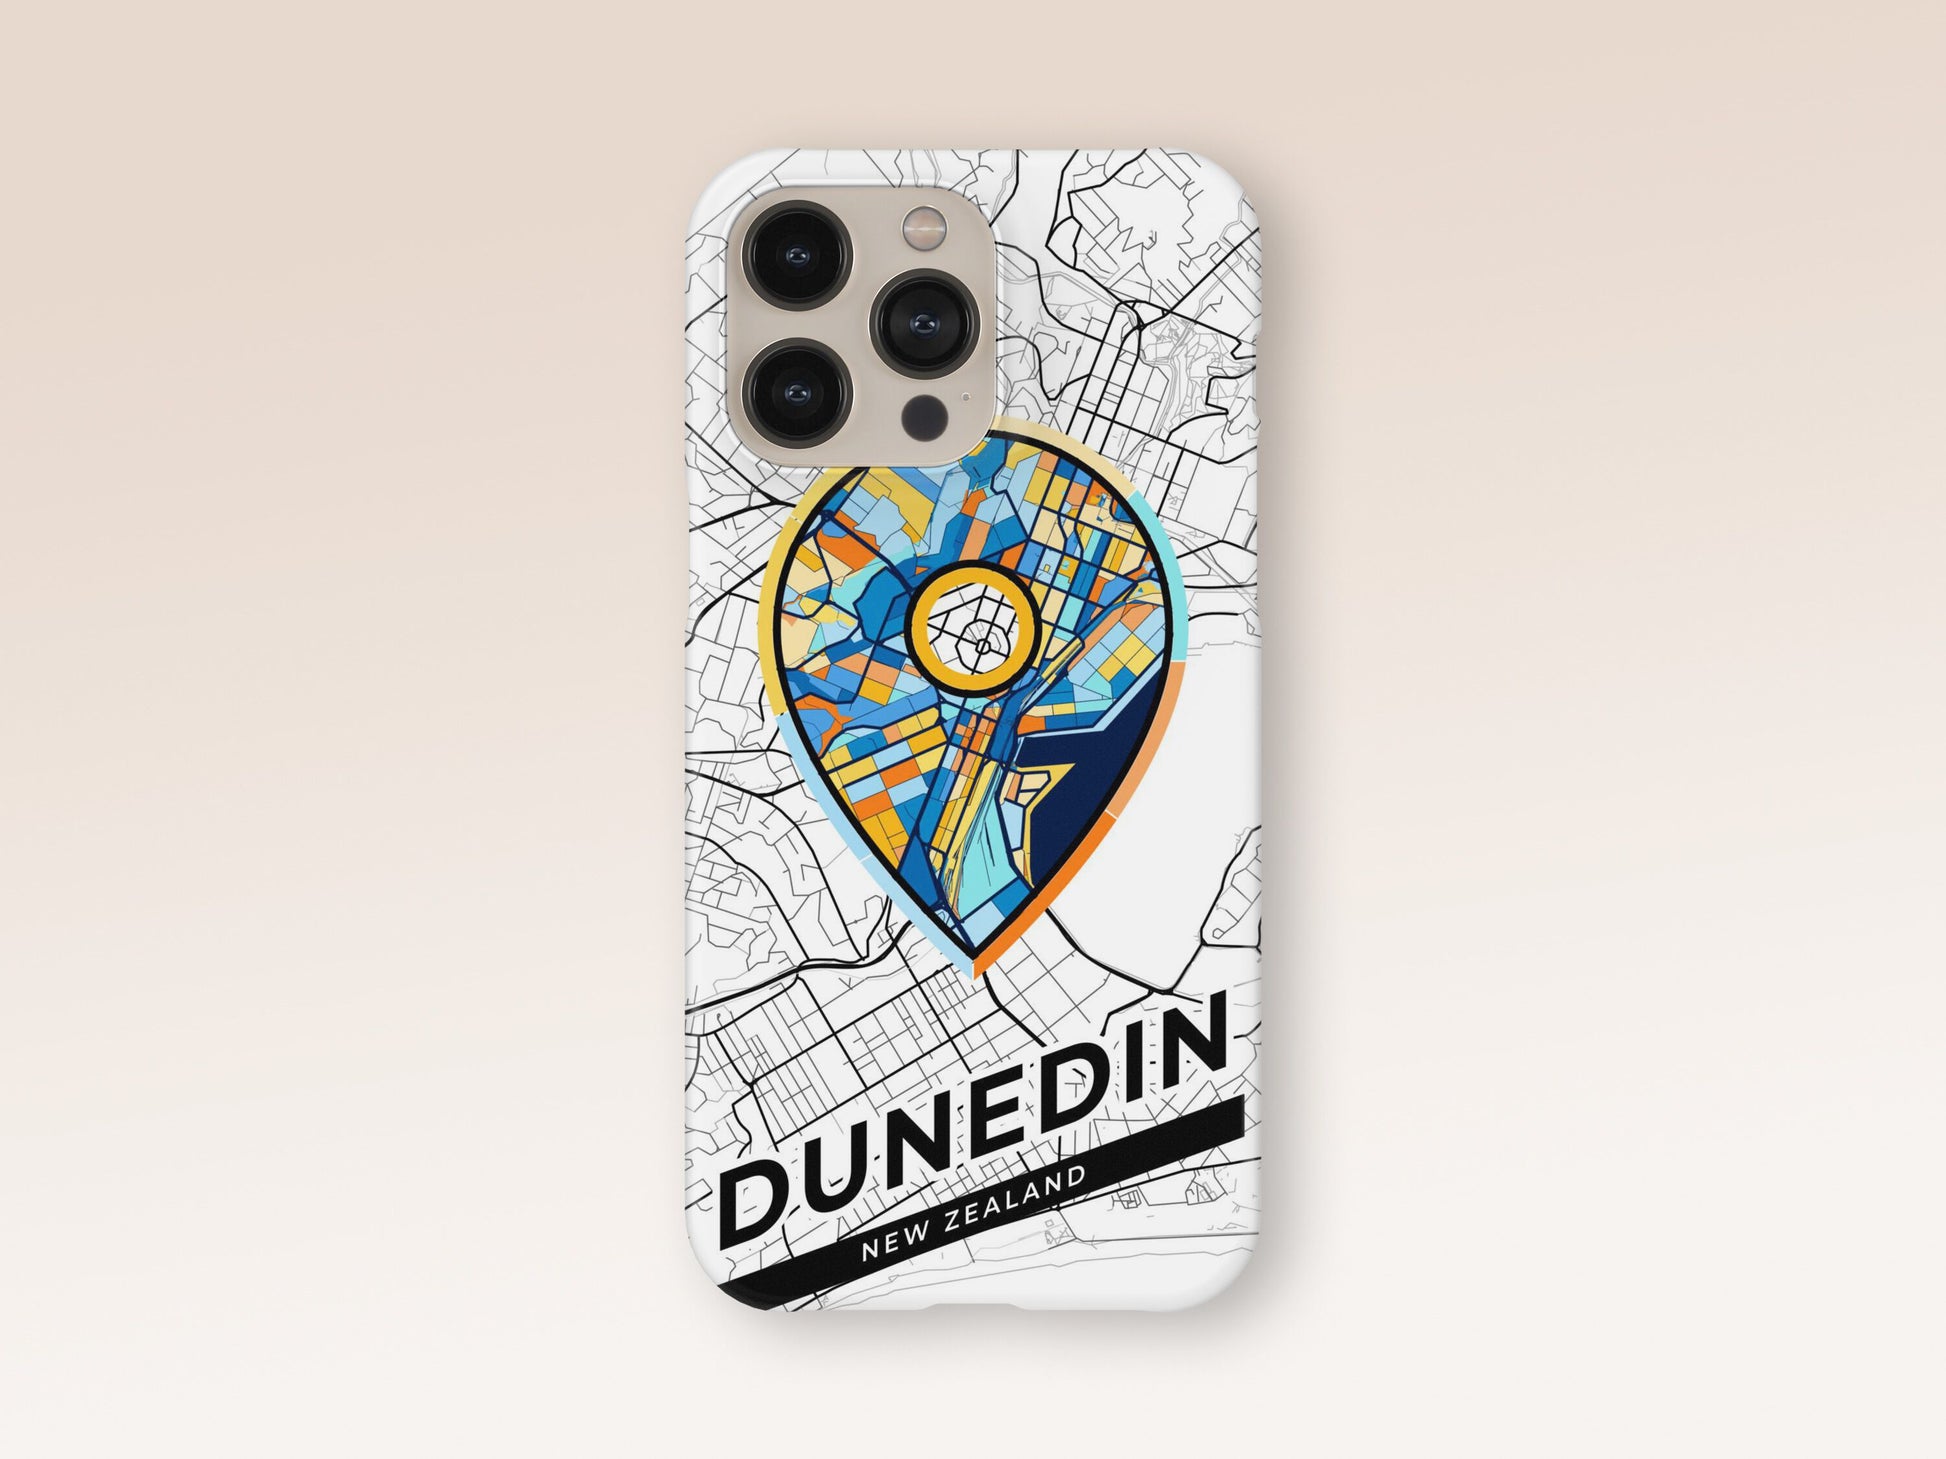 Dunedin New Zealand slim phone case with colorful icon. Birthday, wedding or housewarming gift. Couple match cases. 1